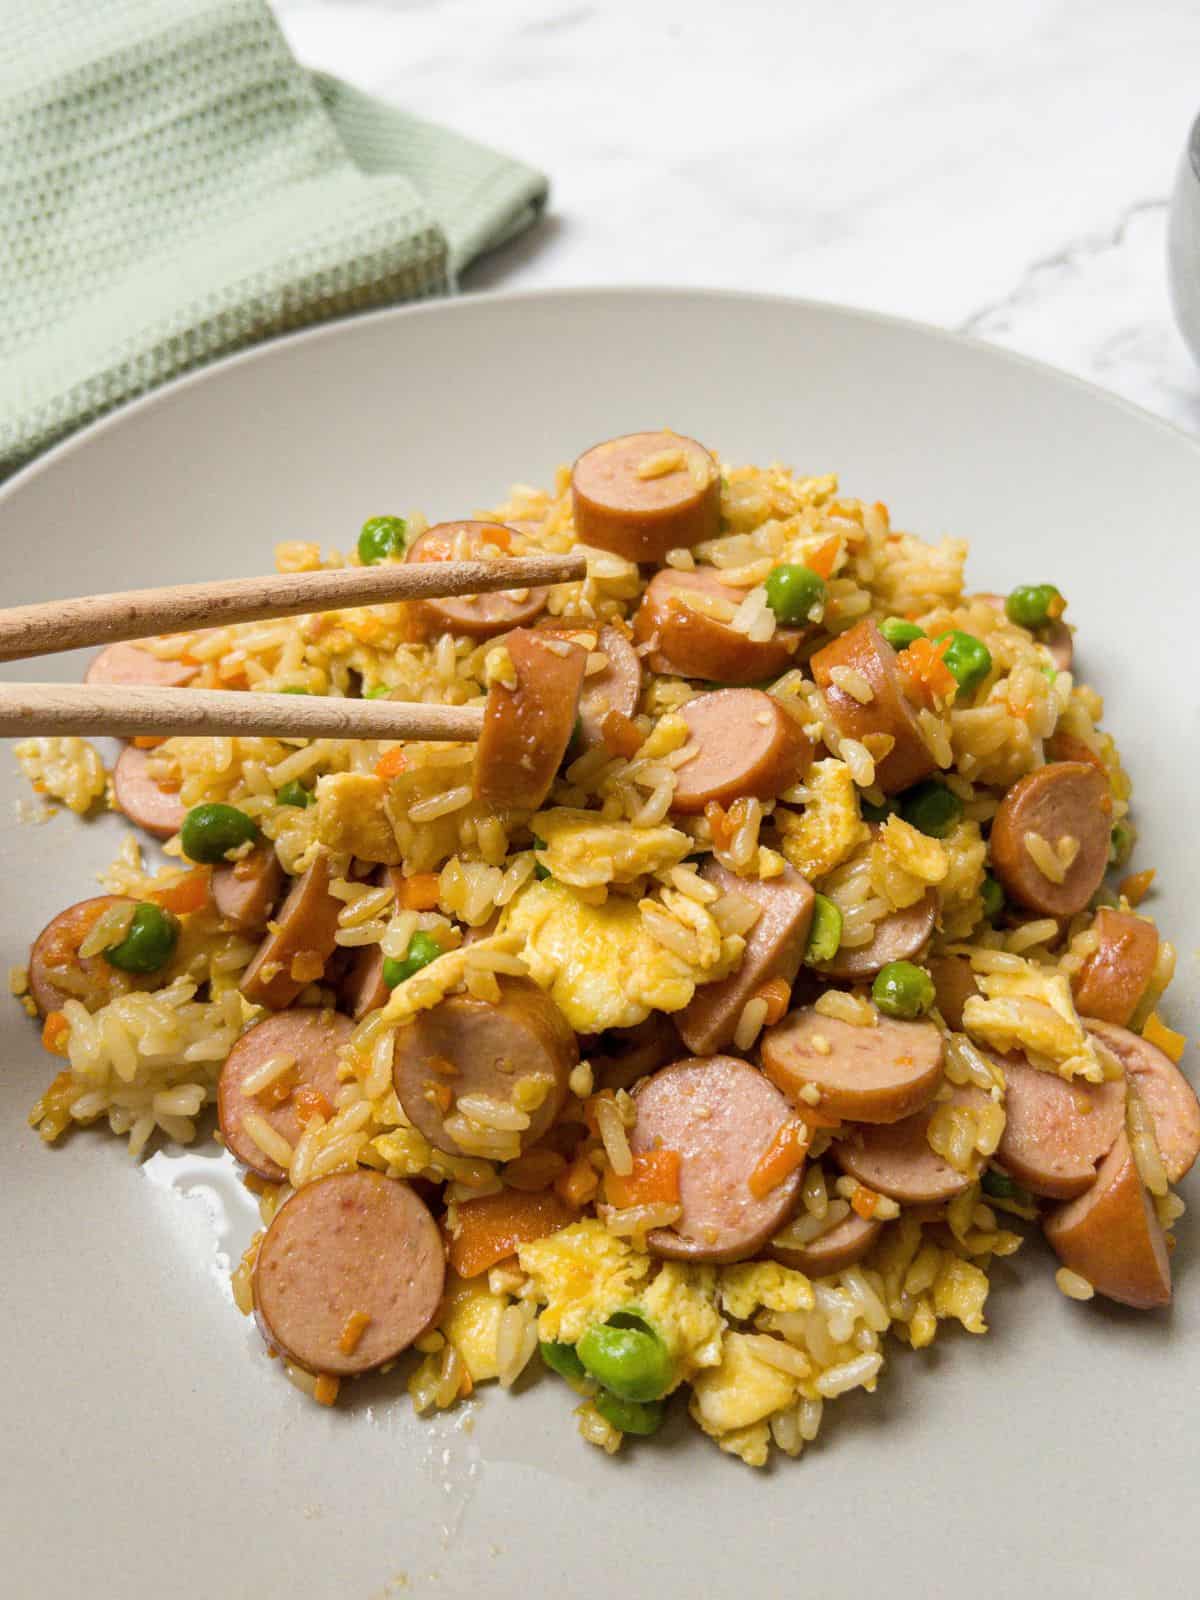 Hot dog fried rice with egg and peas on a plate with chopsticks pickling up some hotdog.